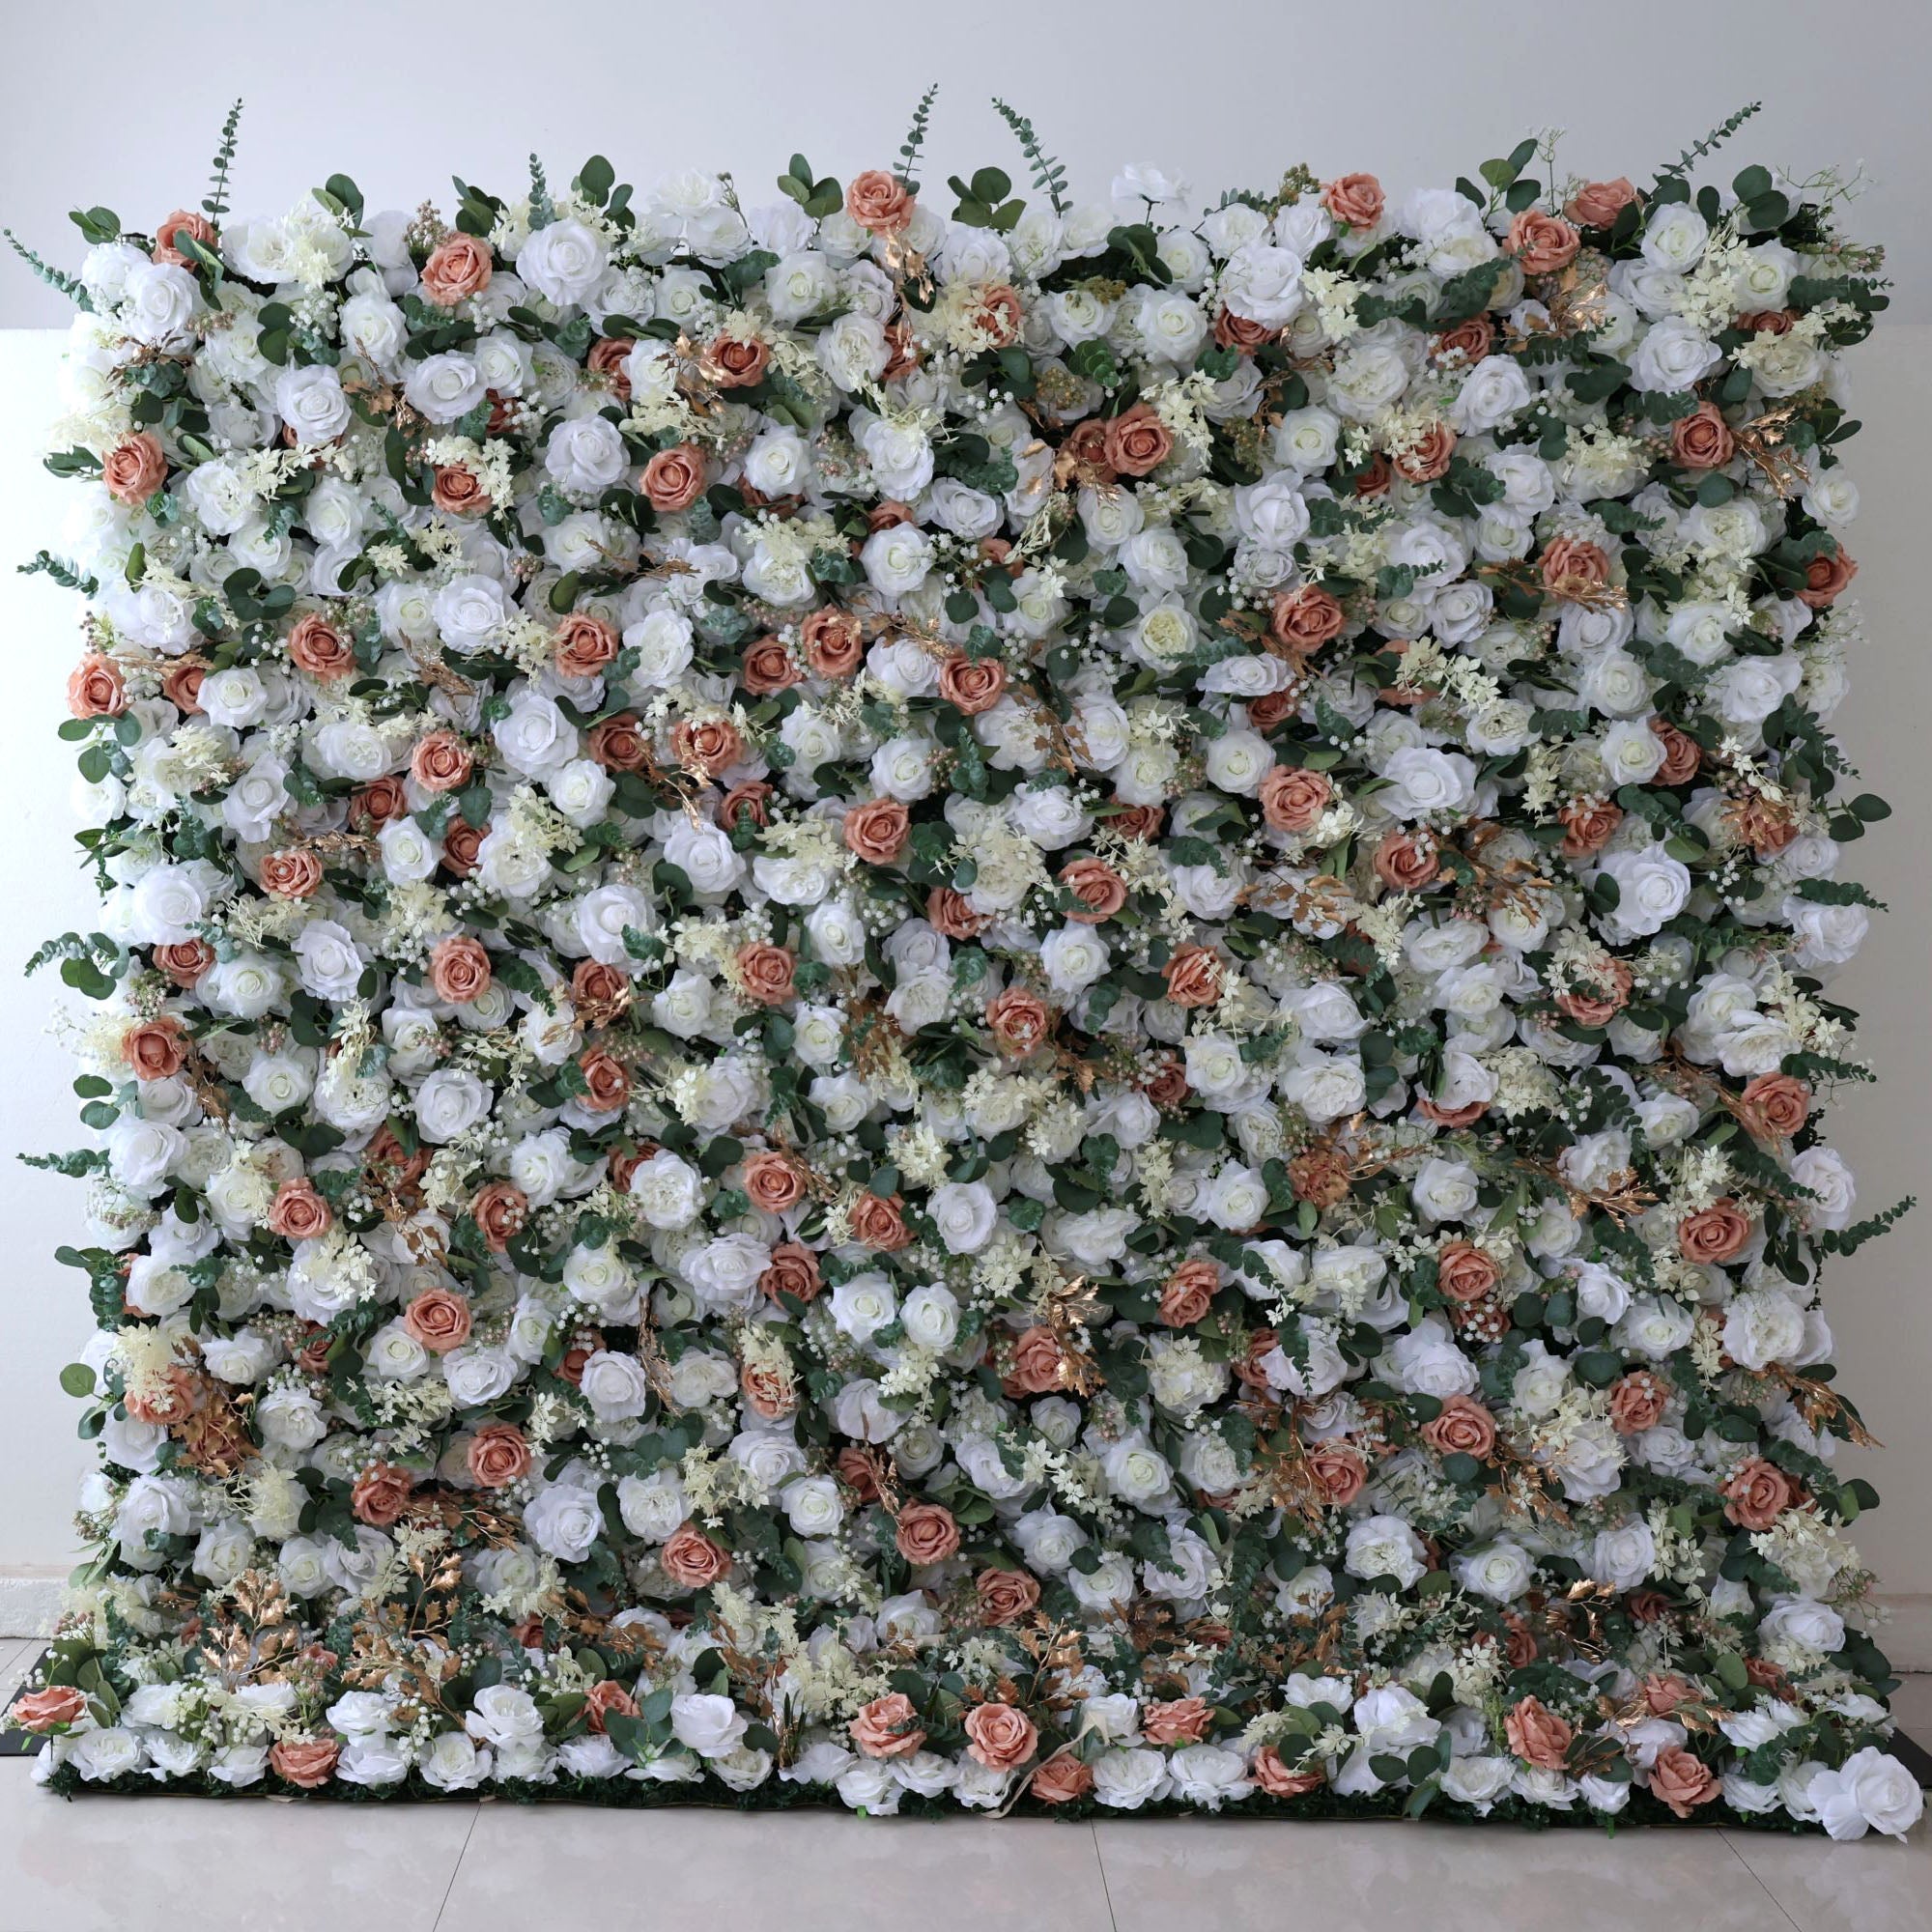 Valar Flowers roll up fabric artificial flower wall for wedding backdrop, floral design VF-3580